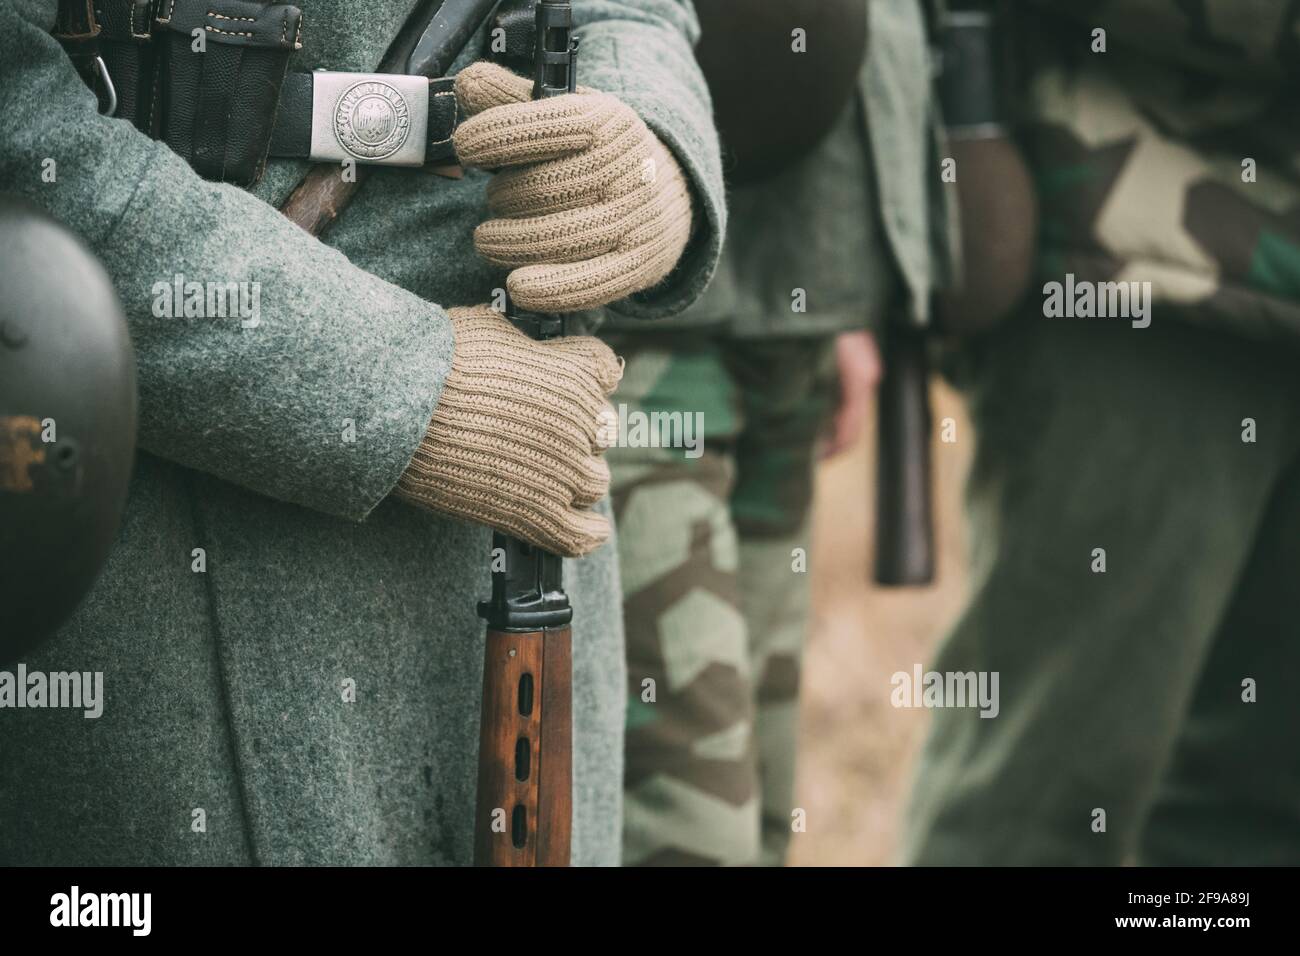 Close Up Of German Military Ammunition Of A German Wehrmacht Soldier. Re-enactors Dressed As World War II German Soldiers Standing Order. Soldier Of Stock Photo